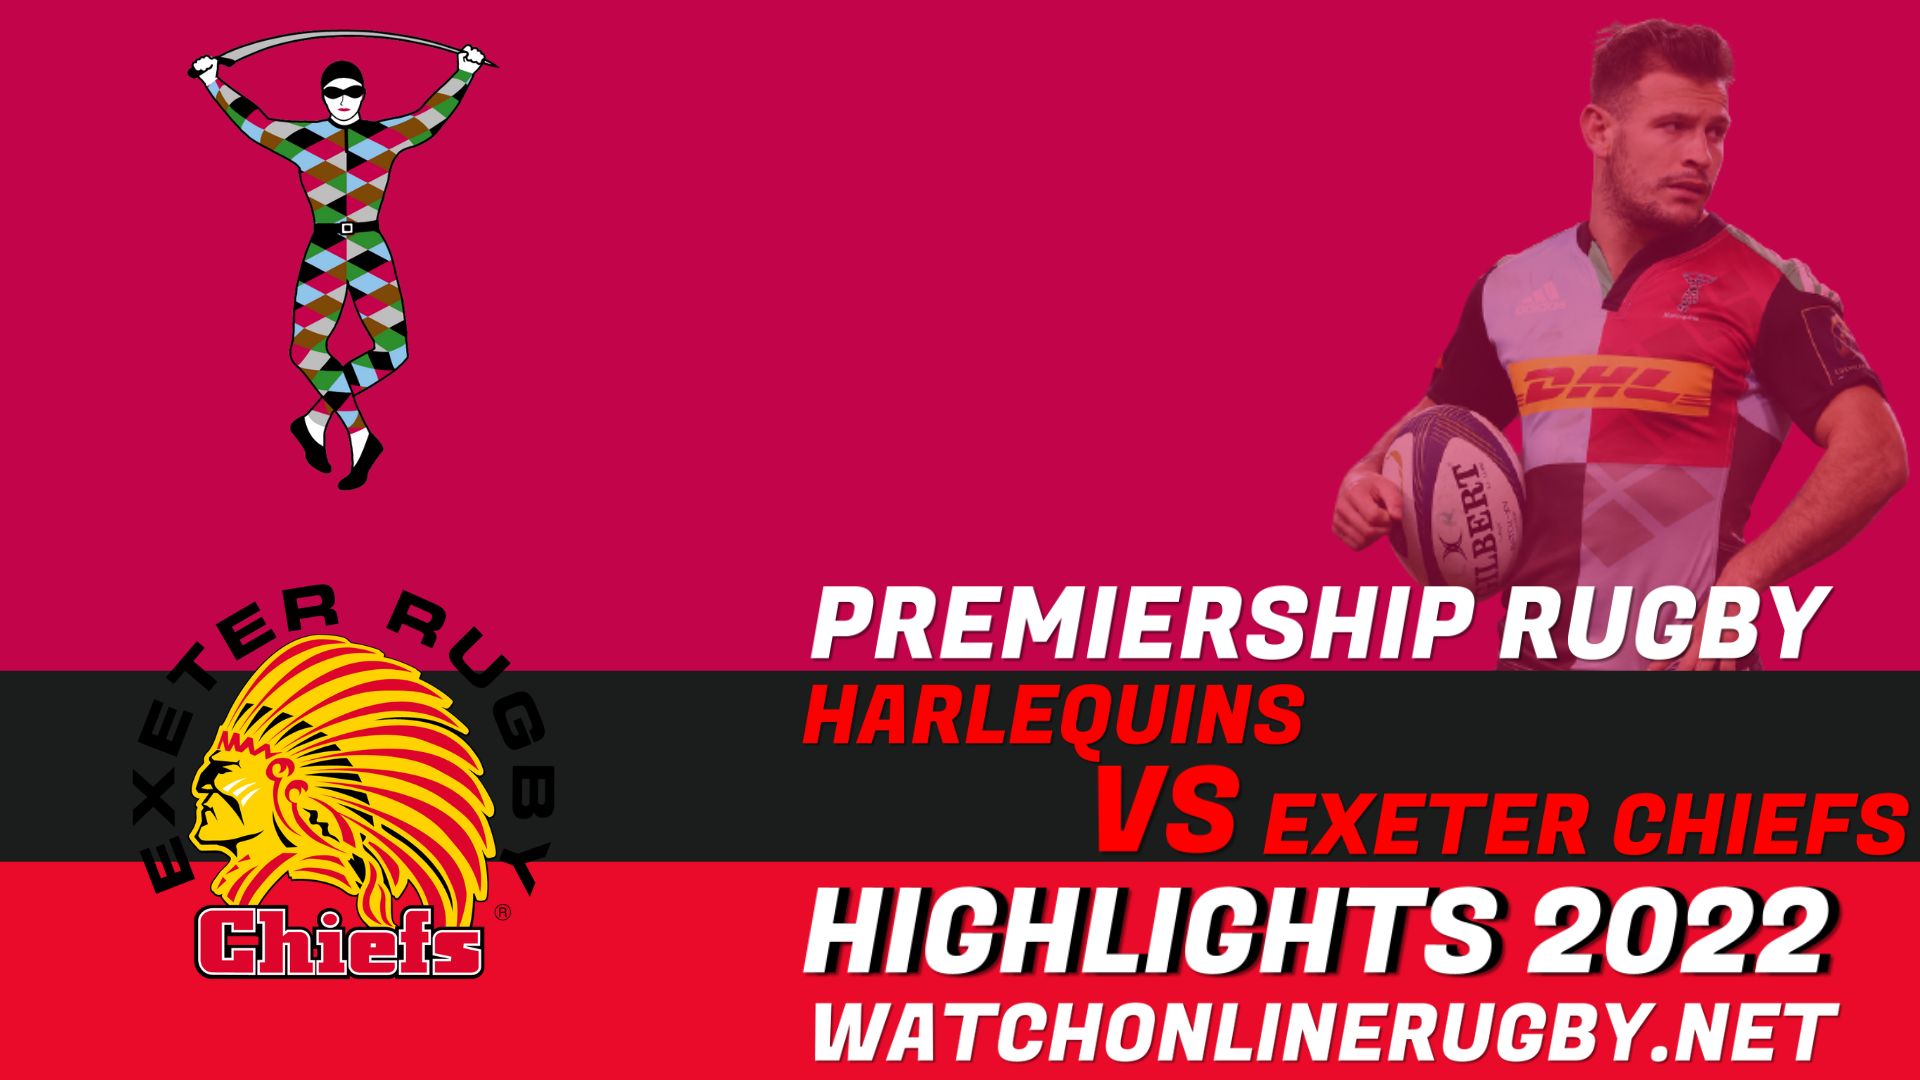 Harlequins Vs Exeter Chiefs Premiership Rugby 2022 RD 13